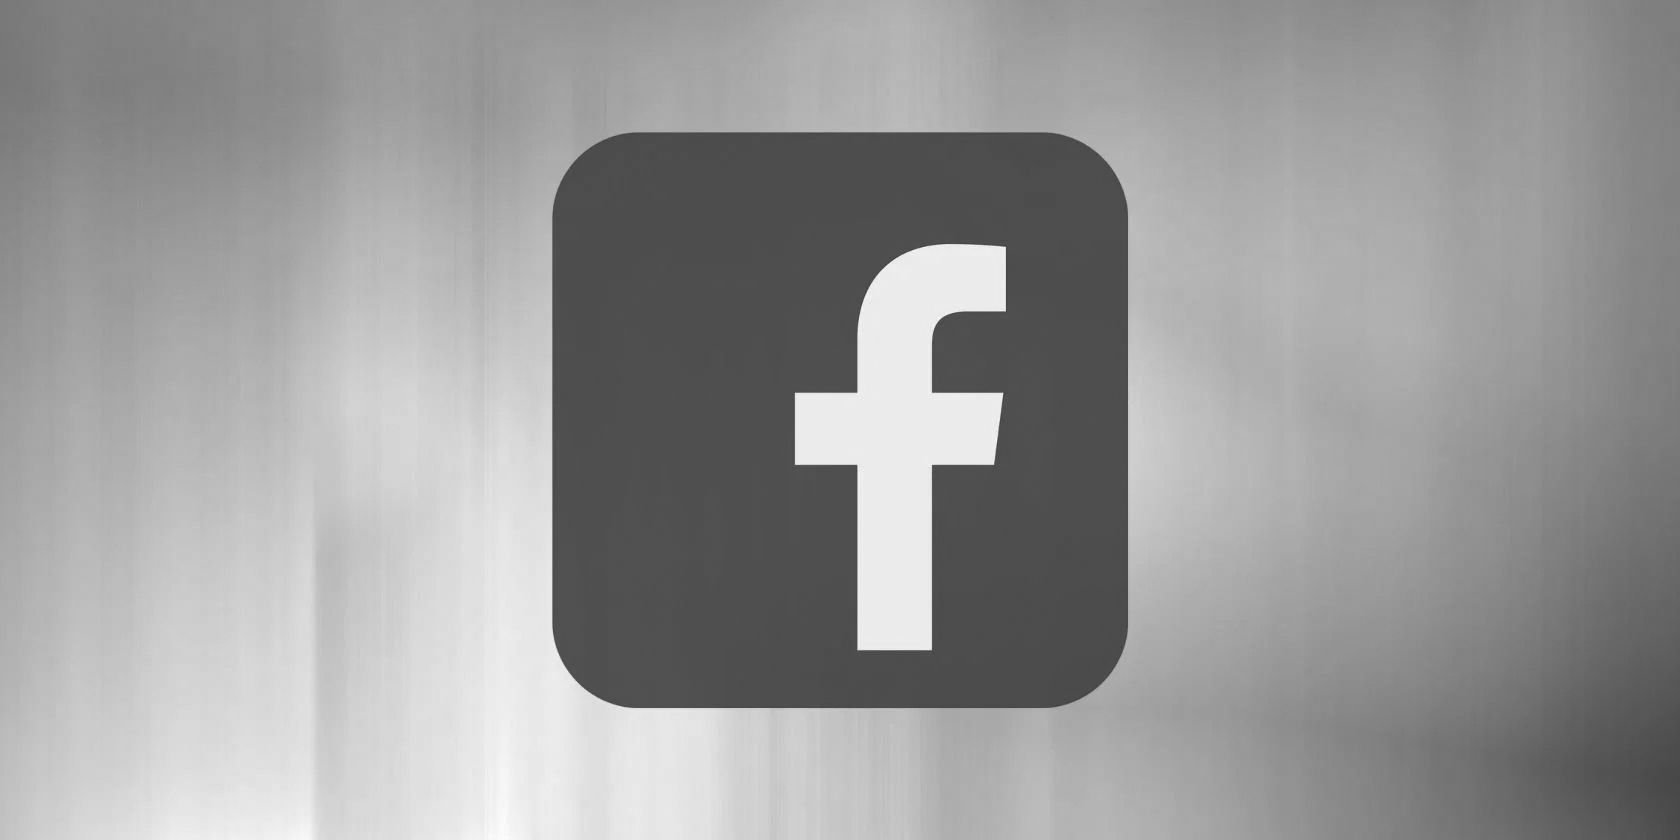 How to Recover Deleted Facebook Posts